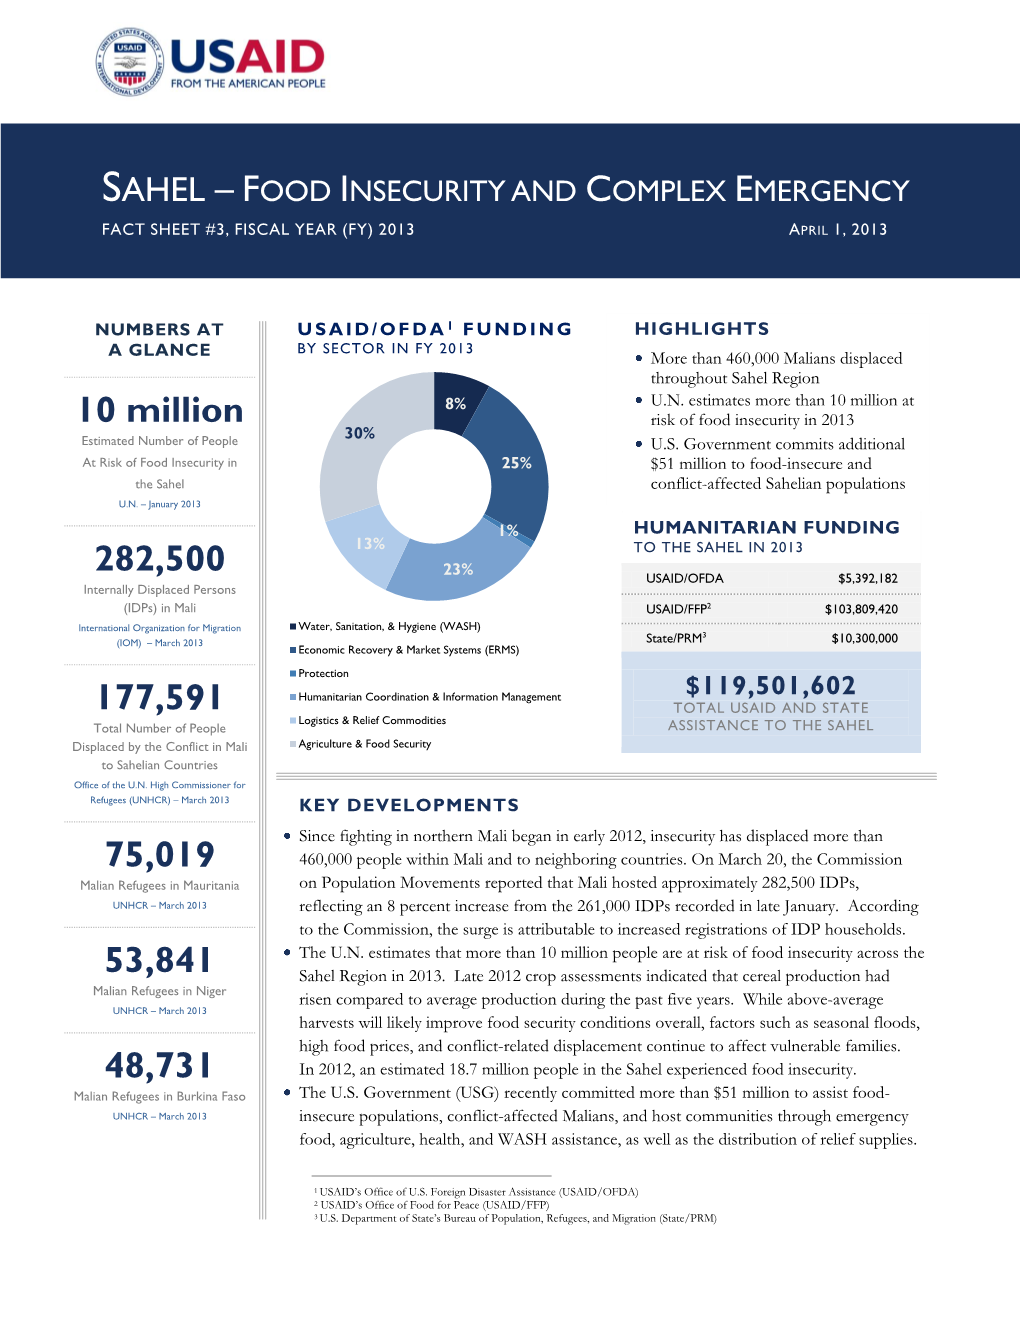 Sahel Food Insecurity and Complex Emergency